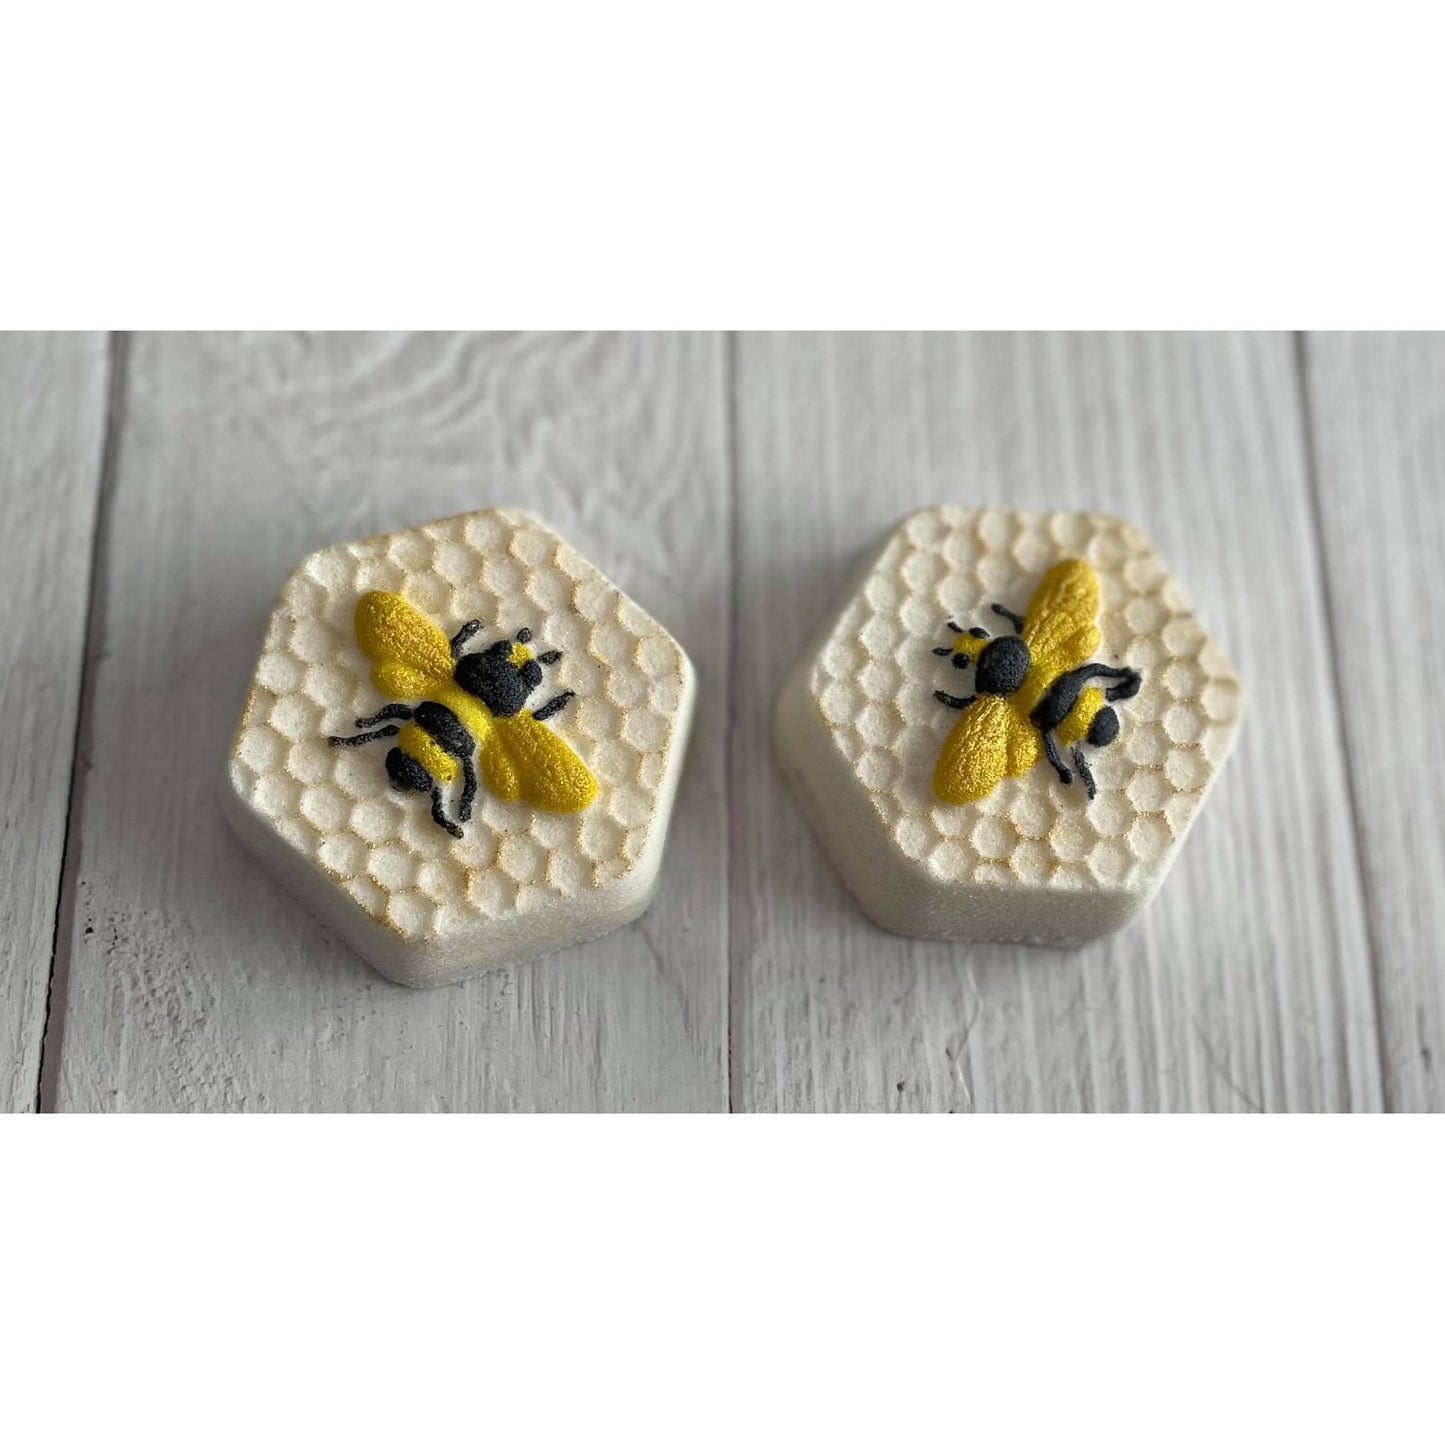 Honeycomb with Bee Vacuum Form Molds